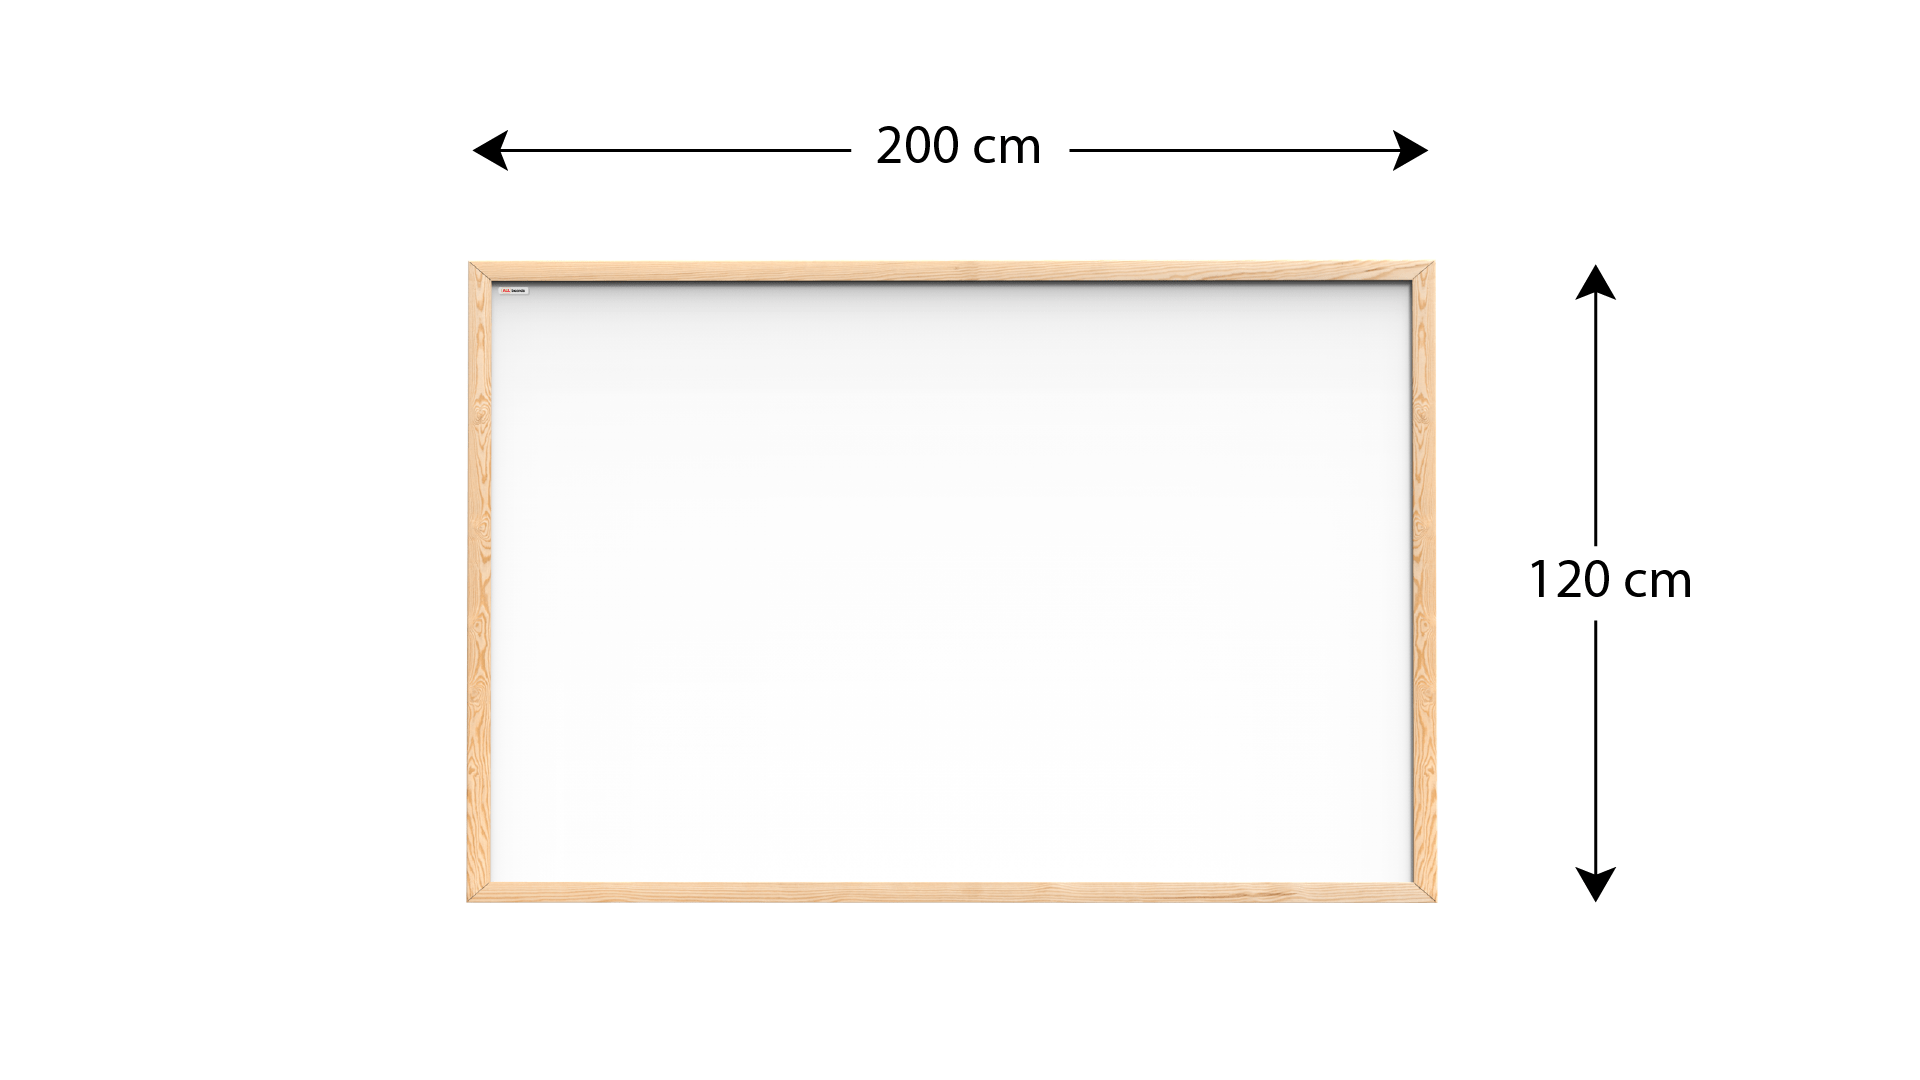 Magnetic Whiteboard Paint | Magnetic Dry Erase Paint